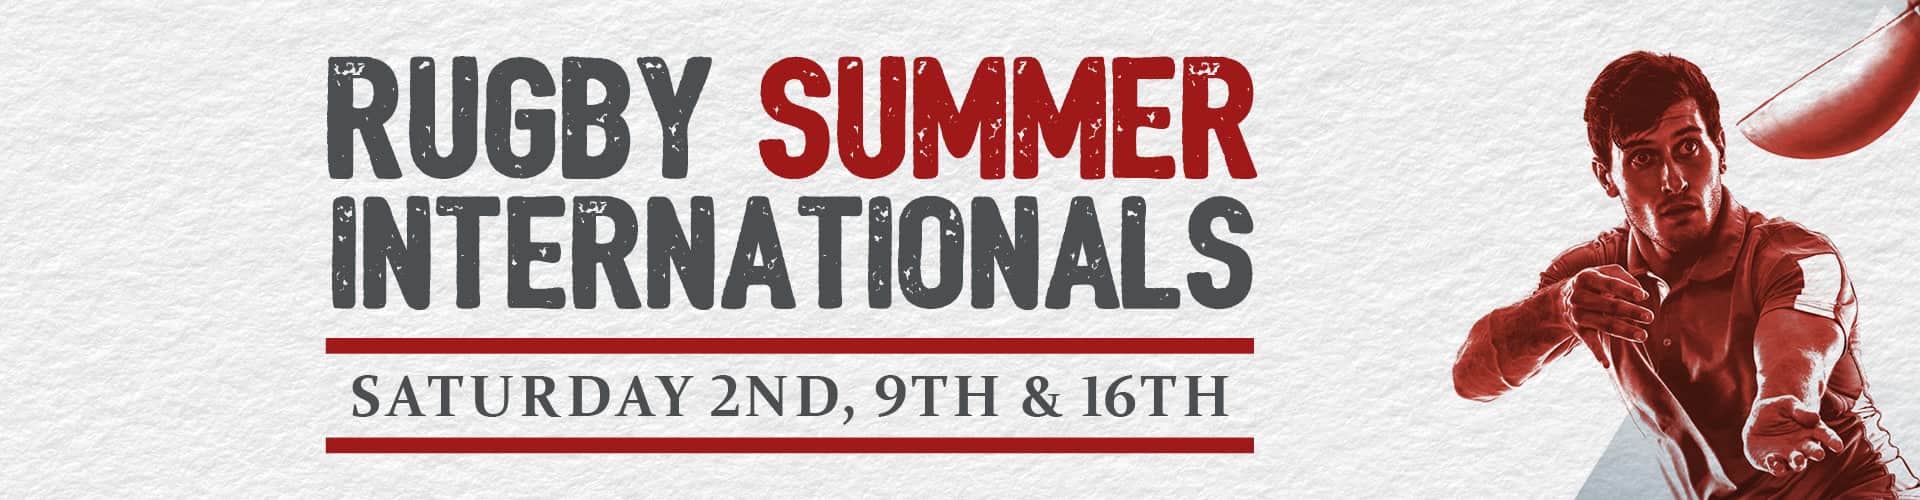 Pubs showing Rugby Summer Internationals live | Classic Inns